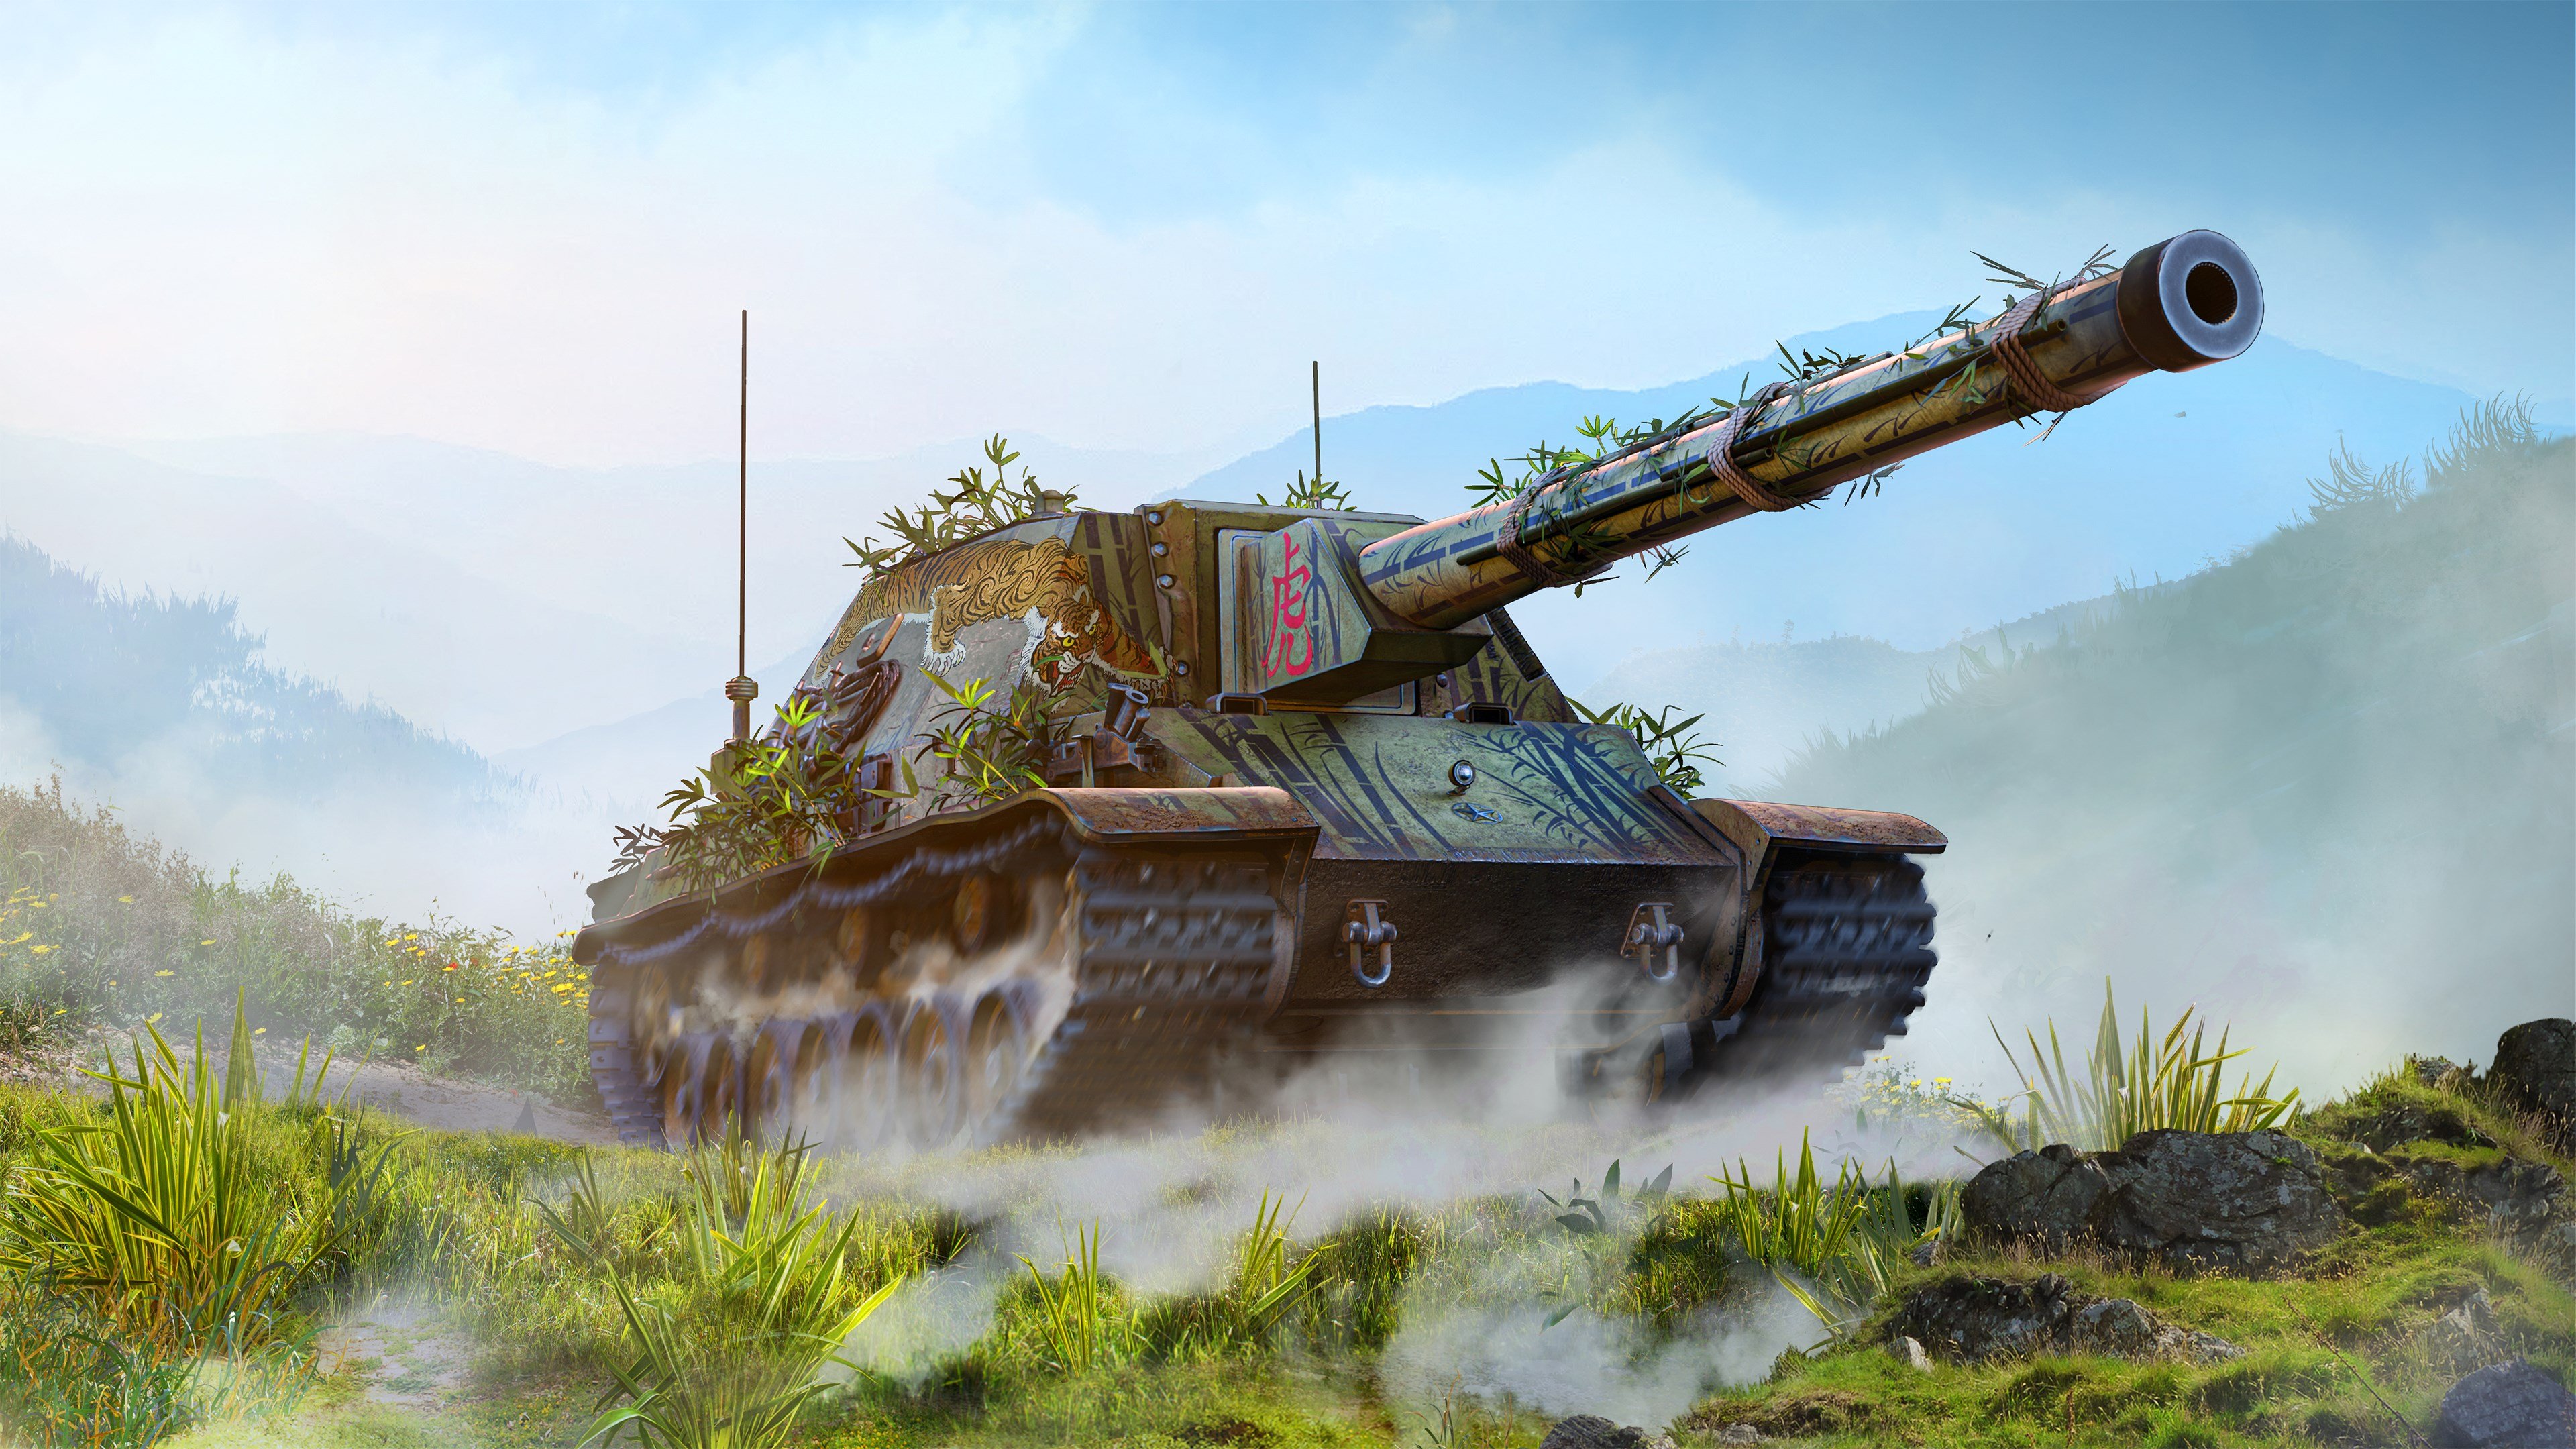 World of Tanks cover image